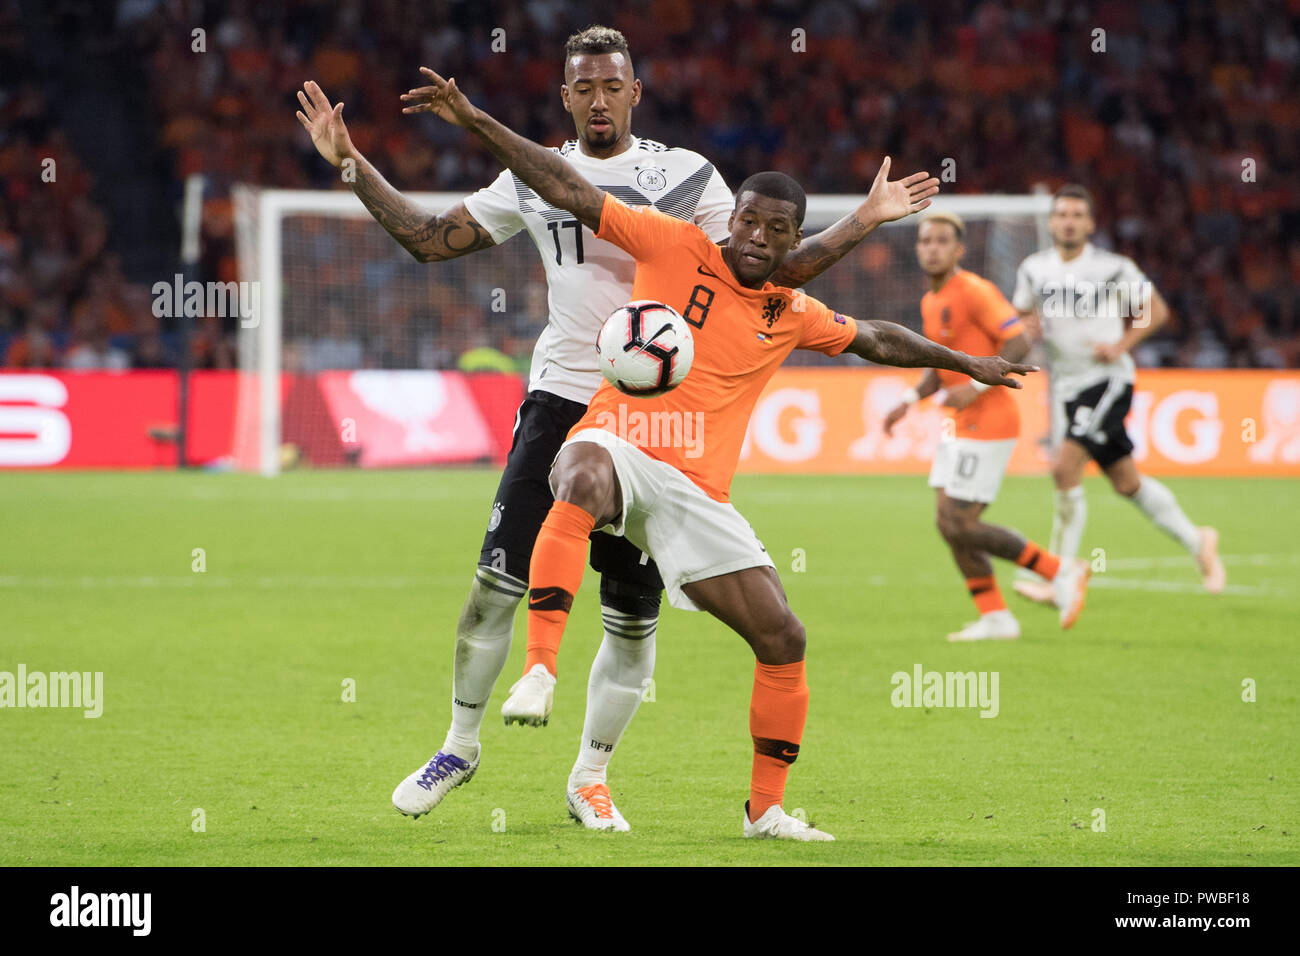 Jerome BOATENG (left, GER) versus Georginio WIJNALDUM (NED), action, duels, football Laender match, Nations League, Netherlands (NED) - Germany (GER) 3: 0, on 13.10.2018 in the Johan Cruyff Arena in Amsterdam/Netherlands. ¬ | usage worldwide Stock Photo